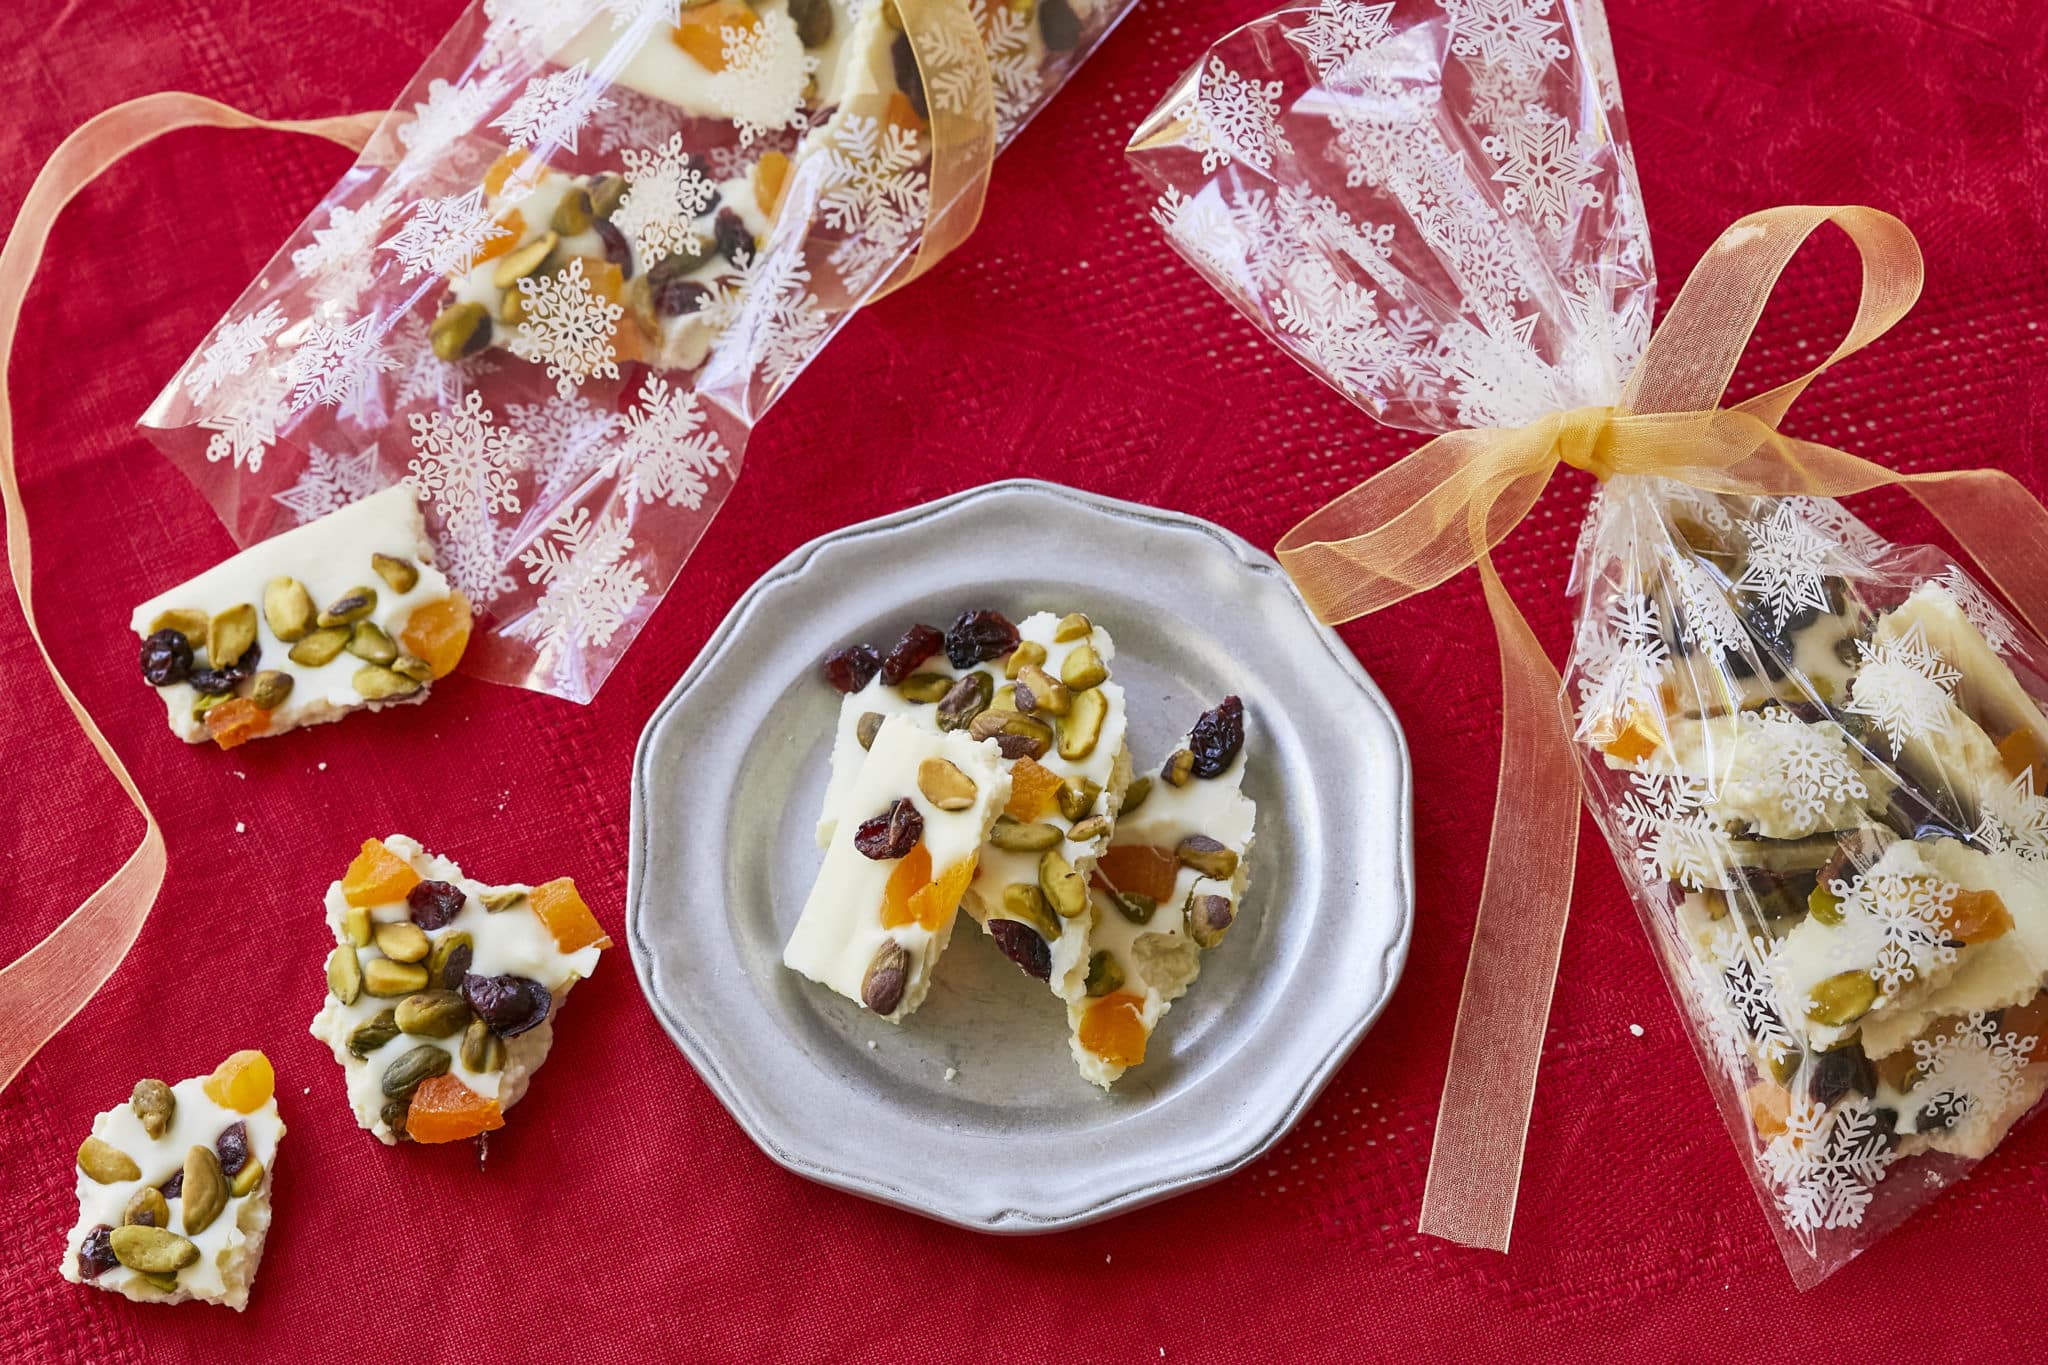 Homemade White Chocolate Bark, topped with dried cranberries, dried apricots, and pistachios, are served on a plate next to festive gift bags filled with pieces of the bark.